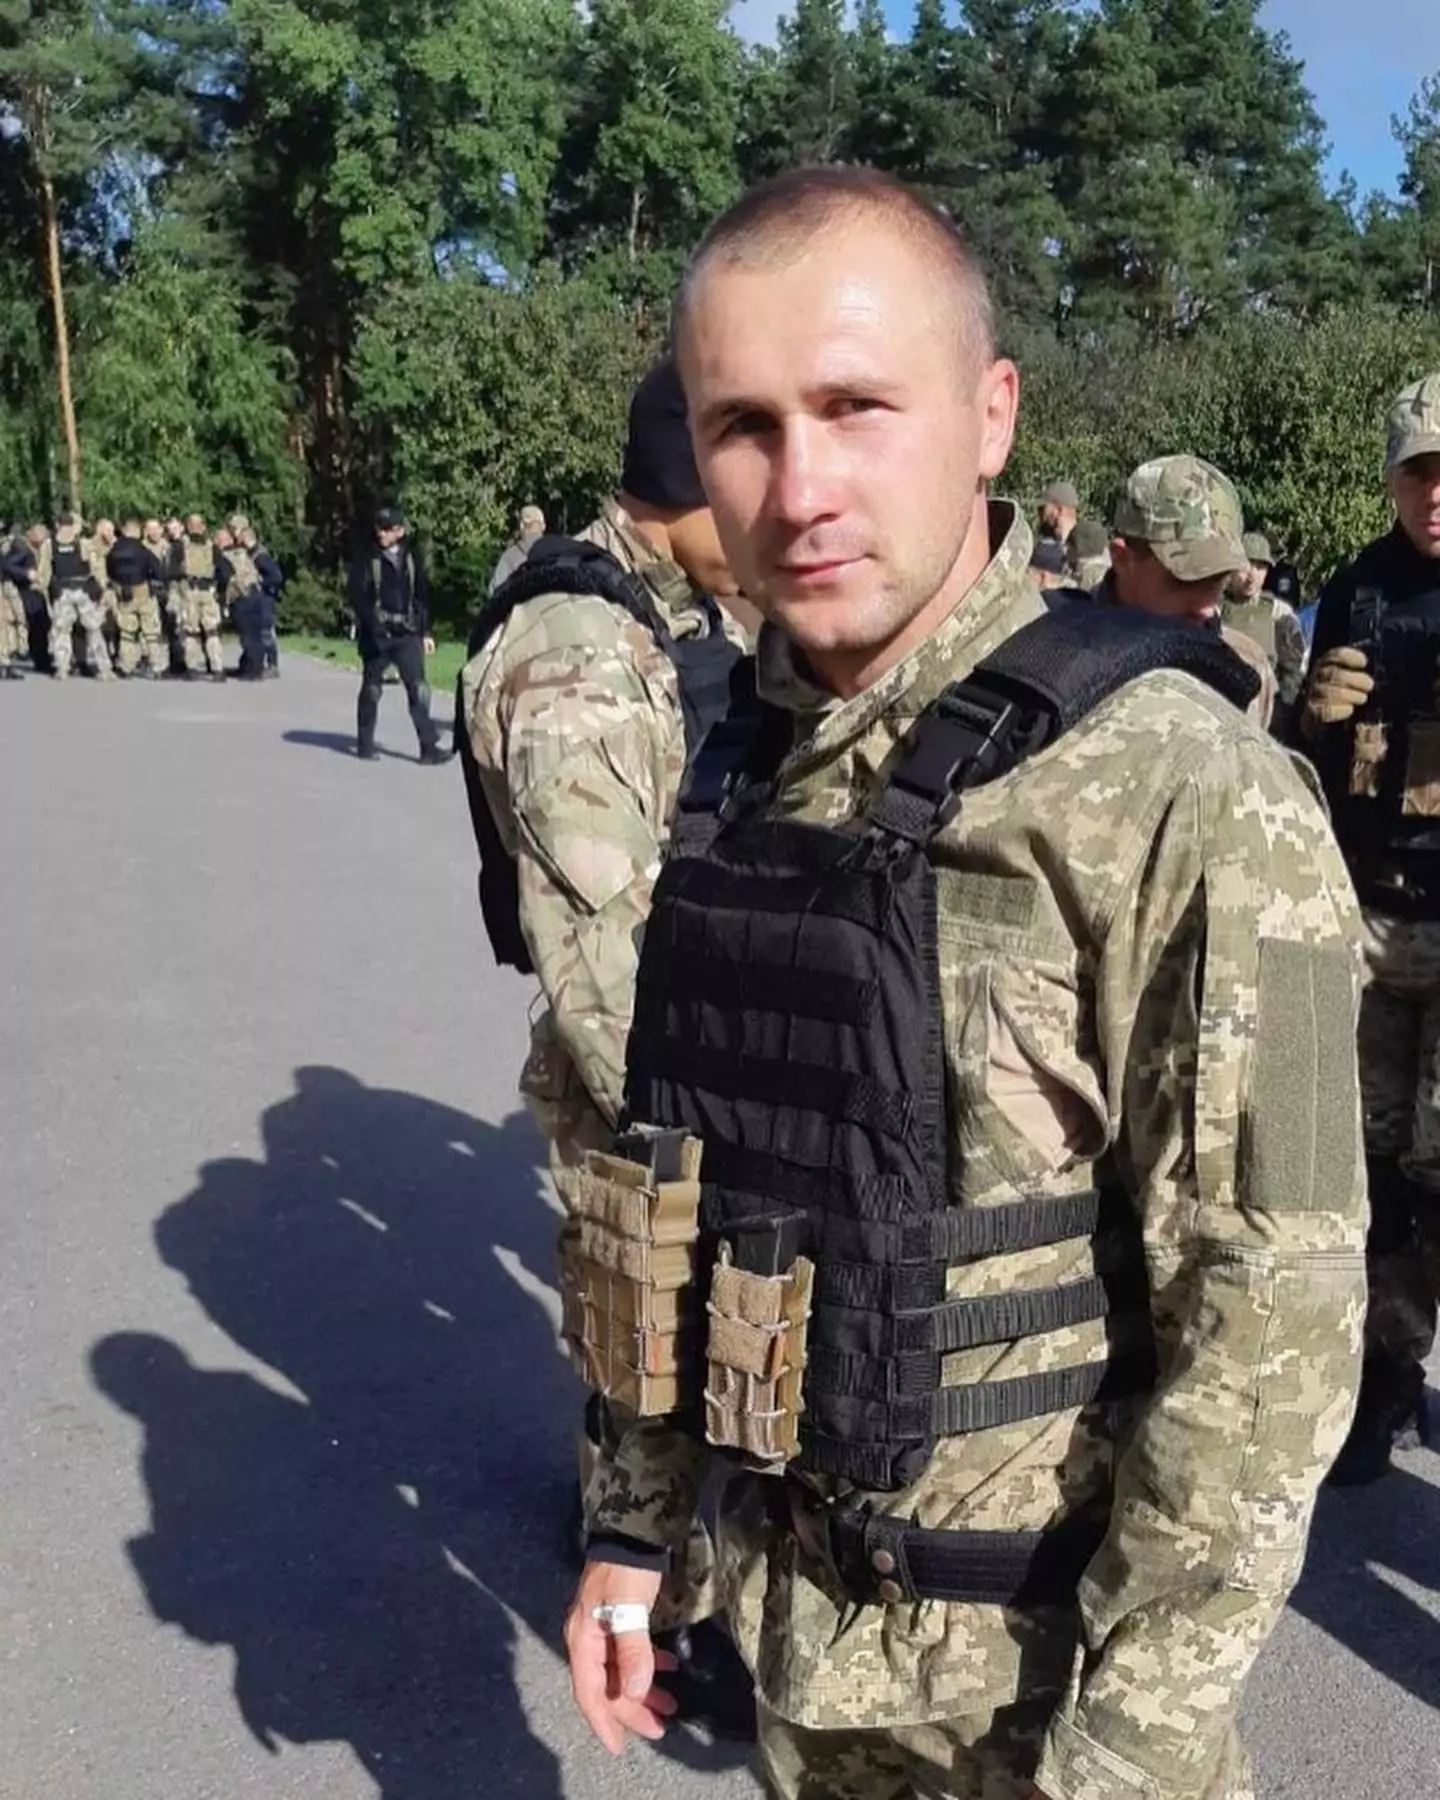 Oleg Prudky sadly lost his life while fighting against Russian forces.